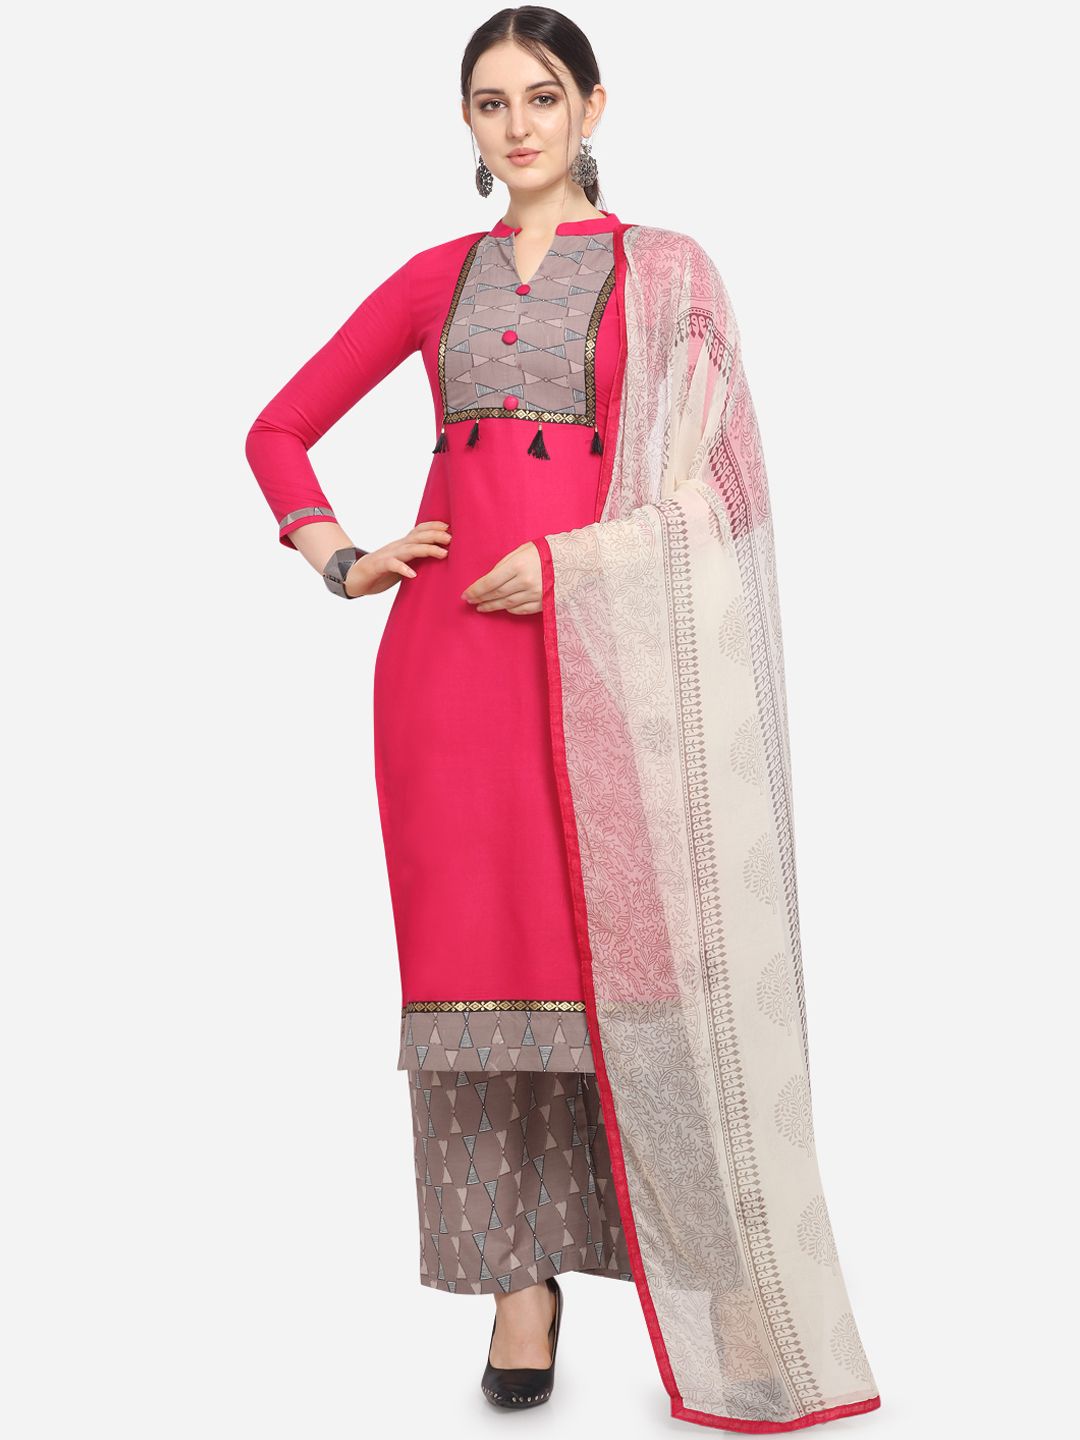 Ethnic Junction Pink & Grey Cotton Blend Unstitched Dress Material Price in India